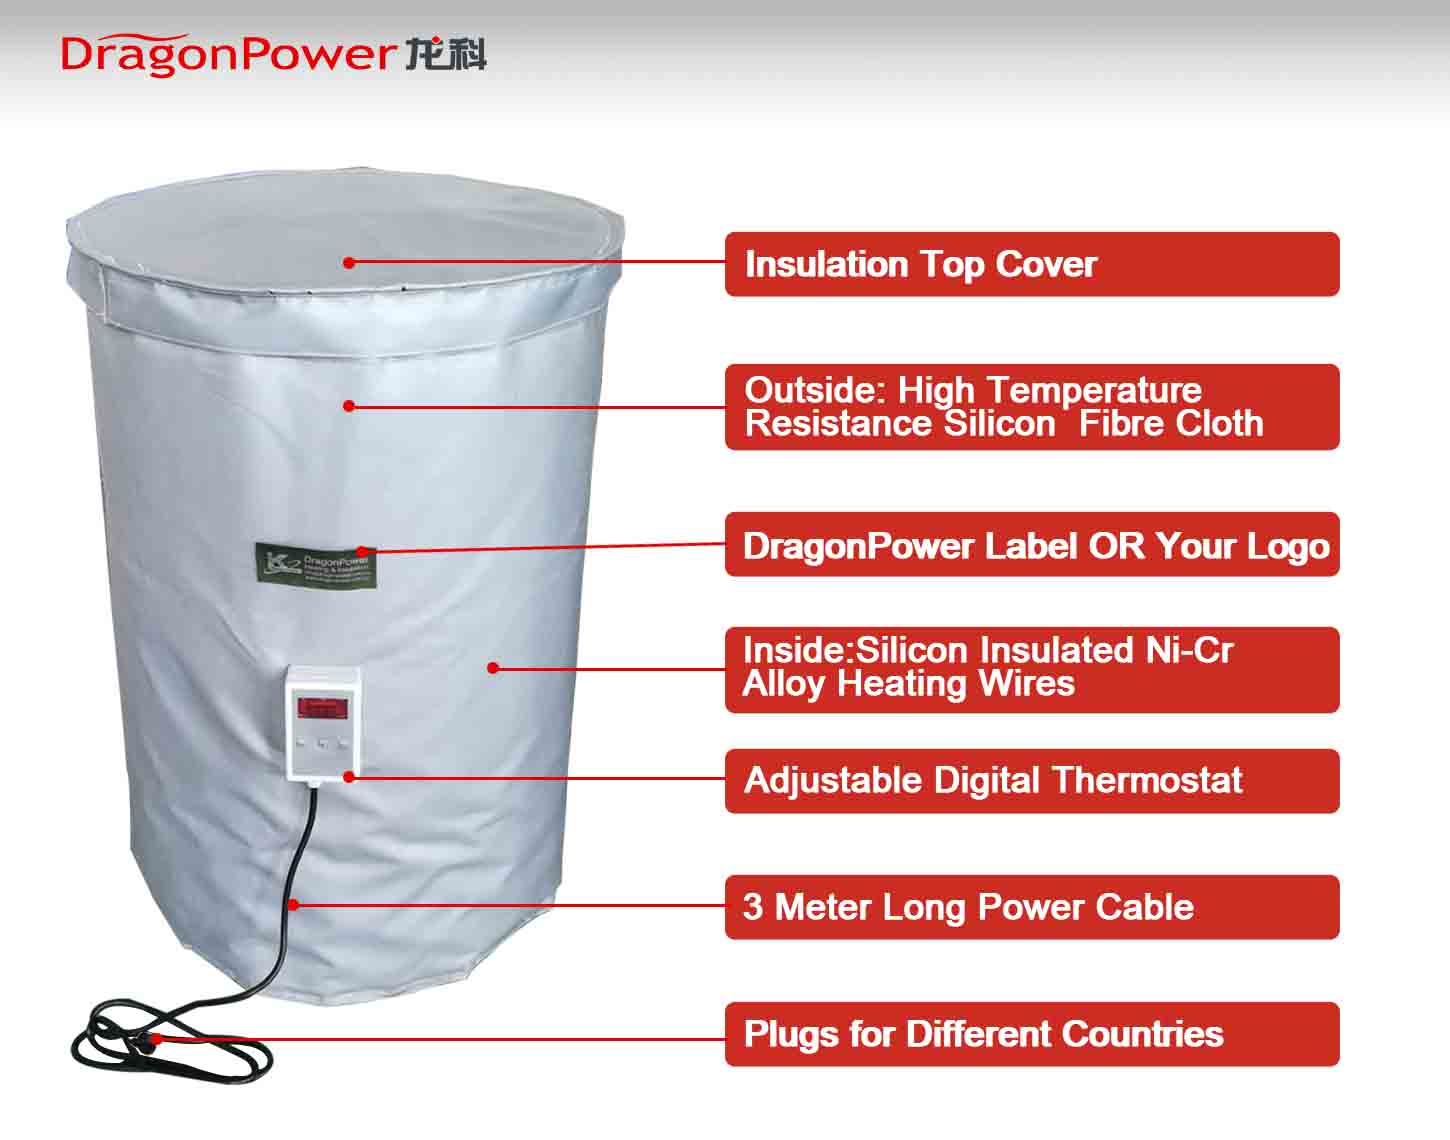 50 - 55 gallon 200-208 Liter Drum Power Blanket Heating Jackets Made in  China - AliExpress